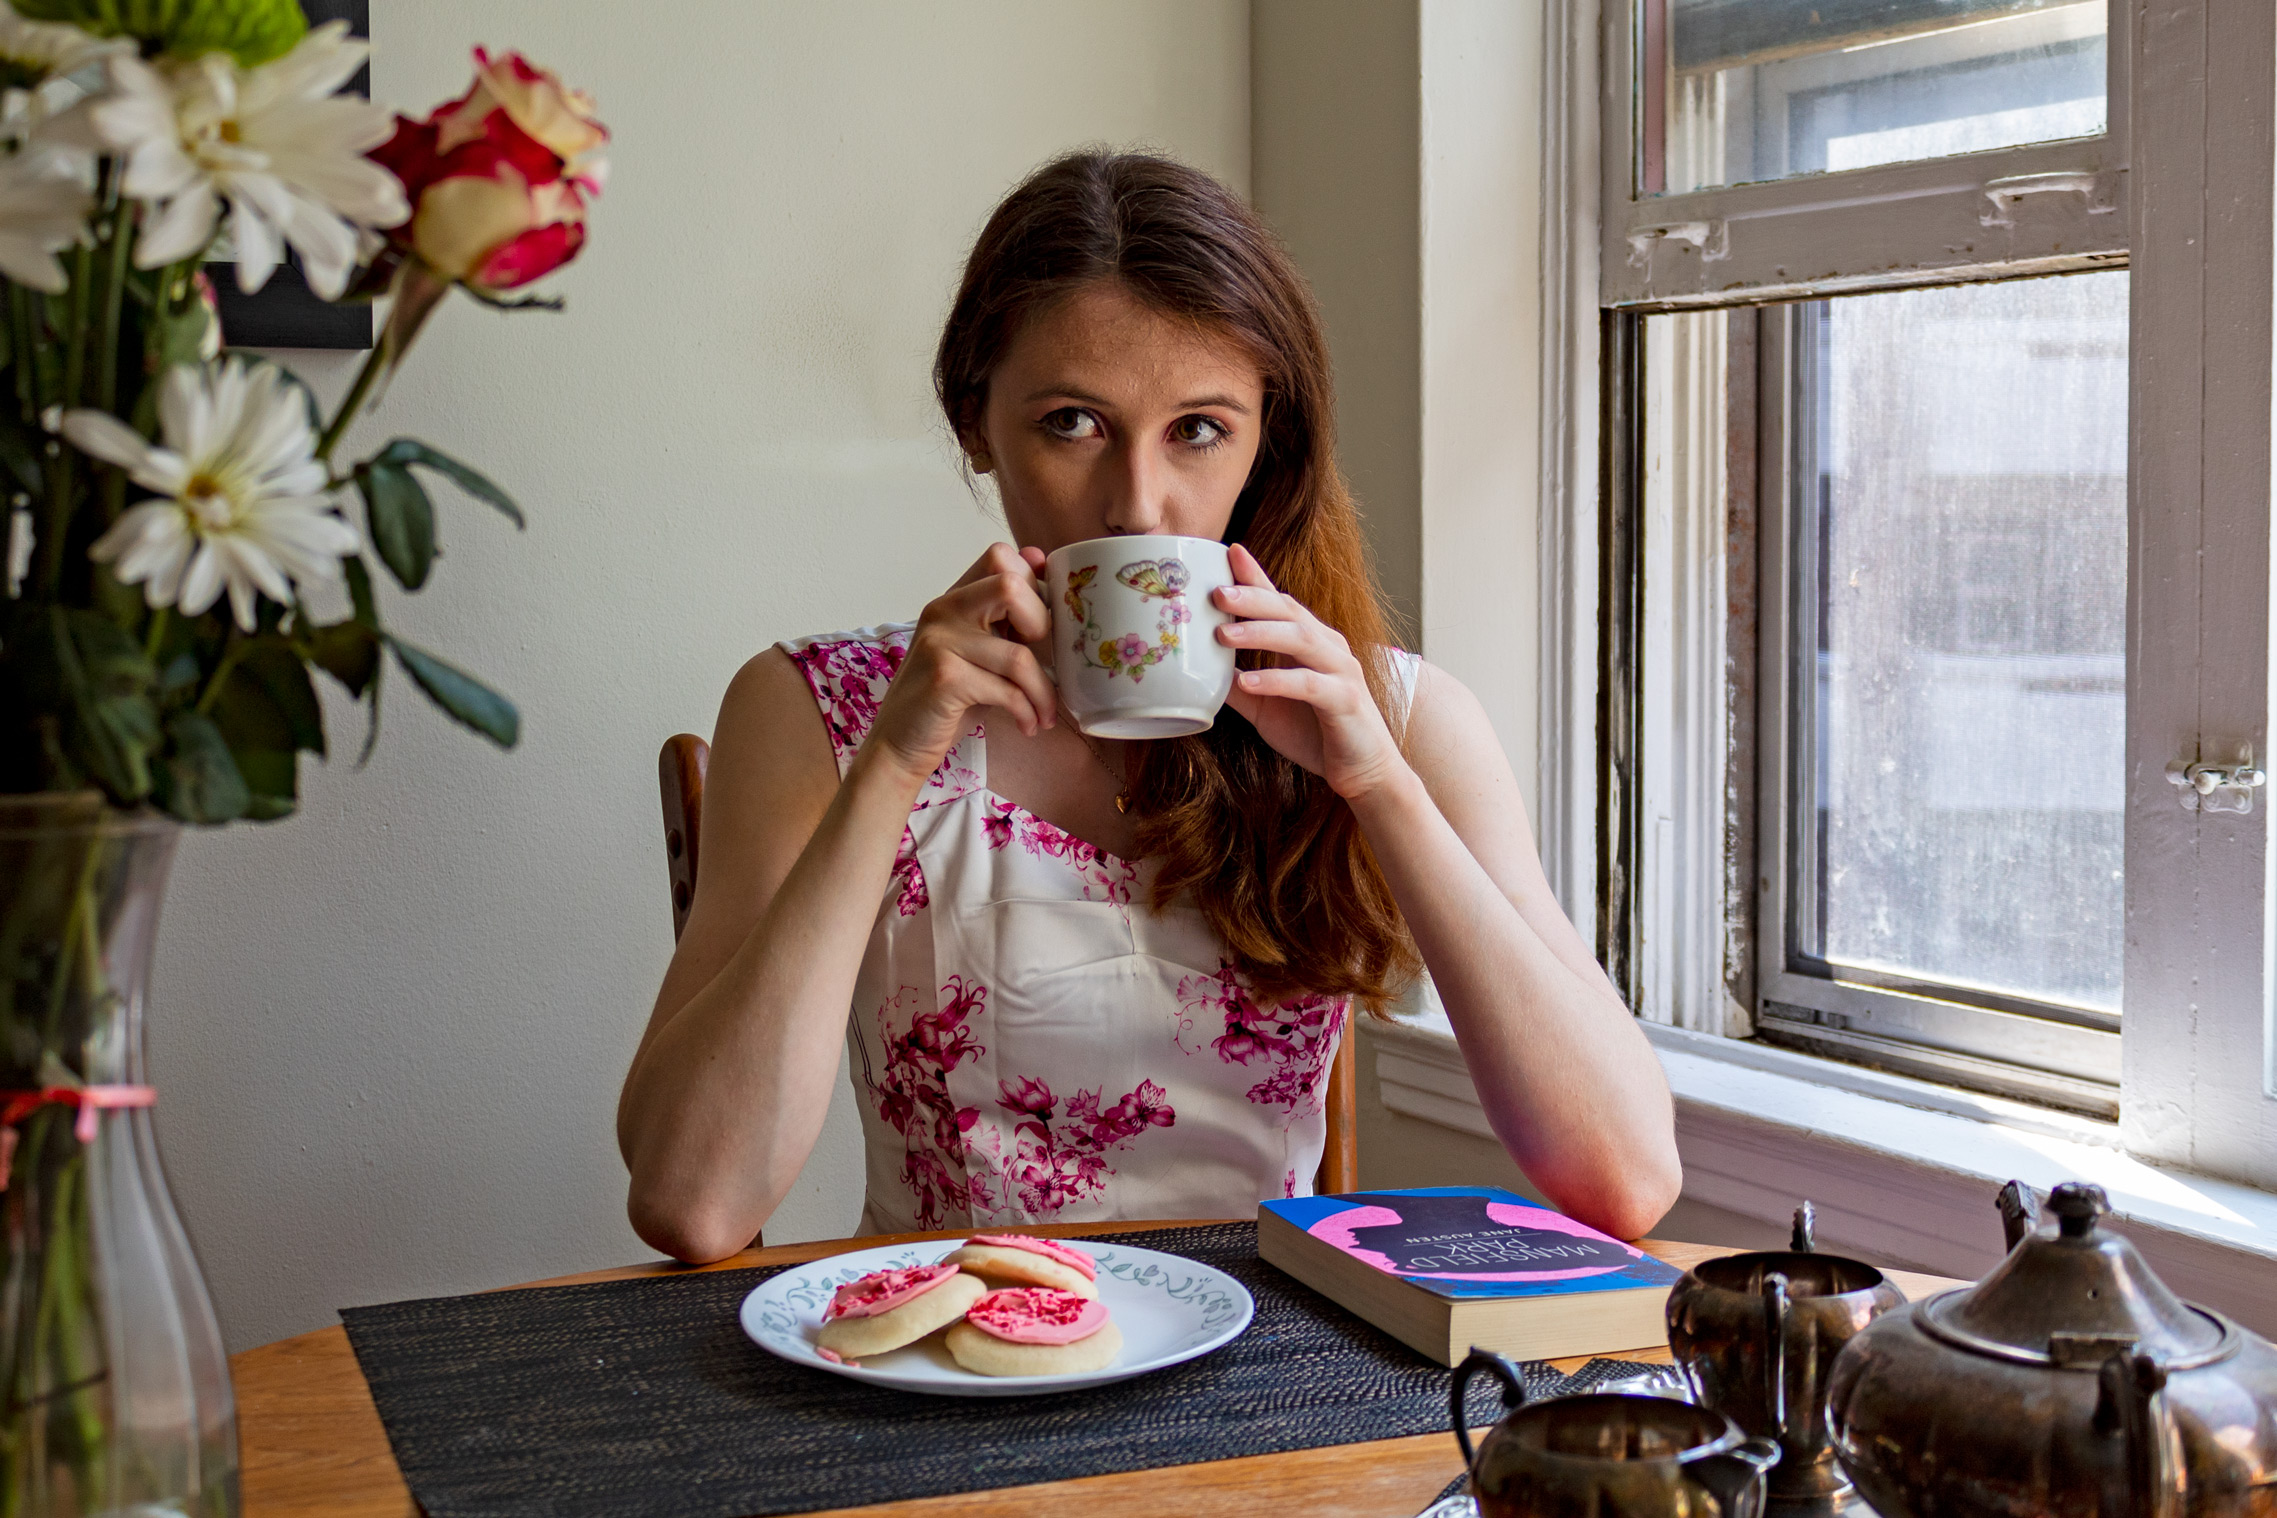 Woman sipping on a cup of tea; in front of her are cookies and a book